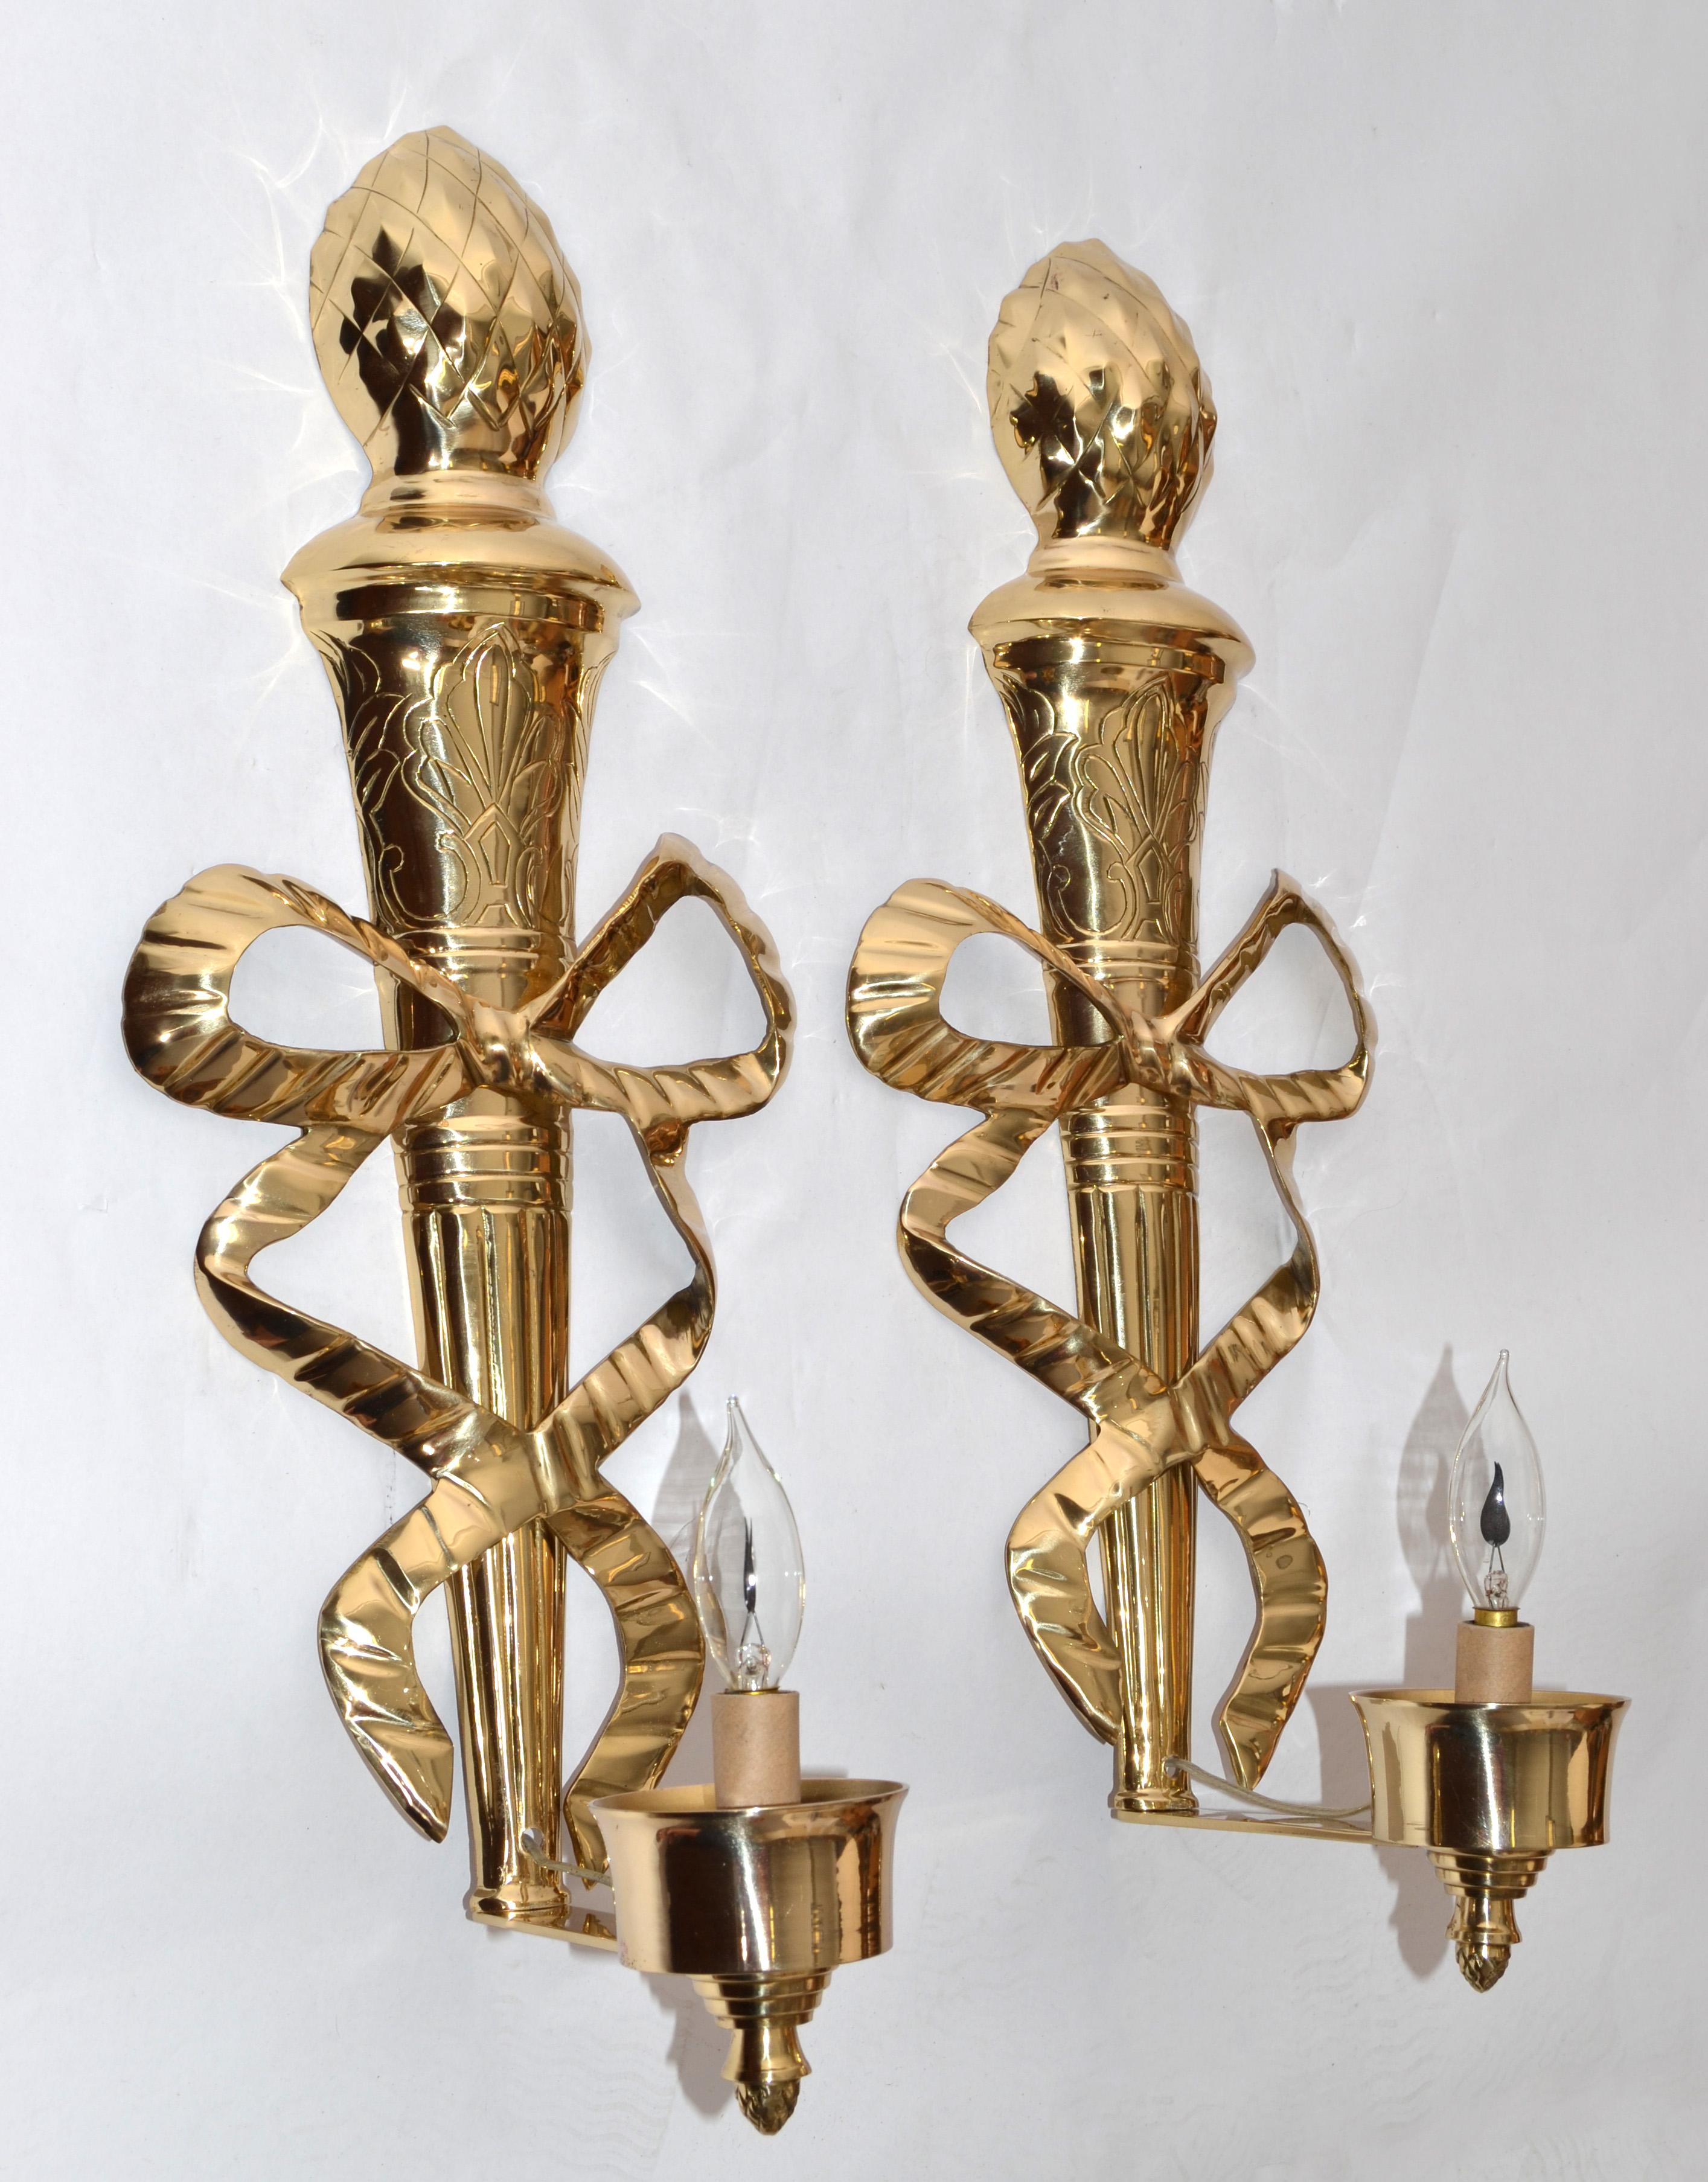 Vintage Pair of 22 inches tall ornate polished and lacquered Brass Bows with Pineapple Tops Sconces, Wall Lamps French Empire Style Brass Home Decor.
The lower portion has a central tassel swag over a fluted architectural column which ends with an